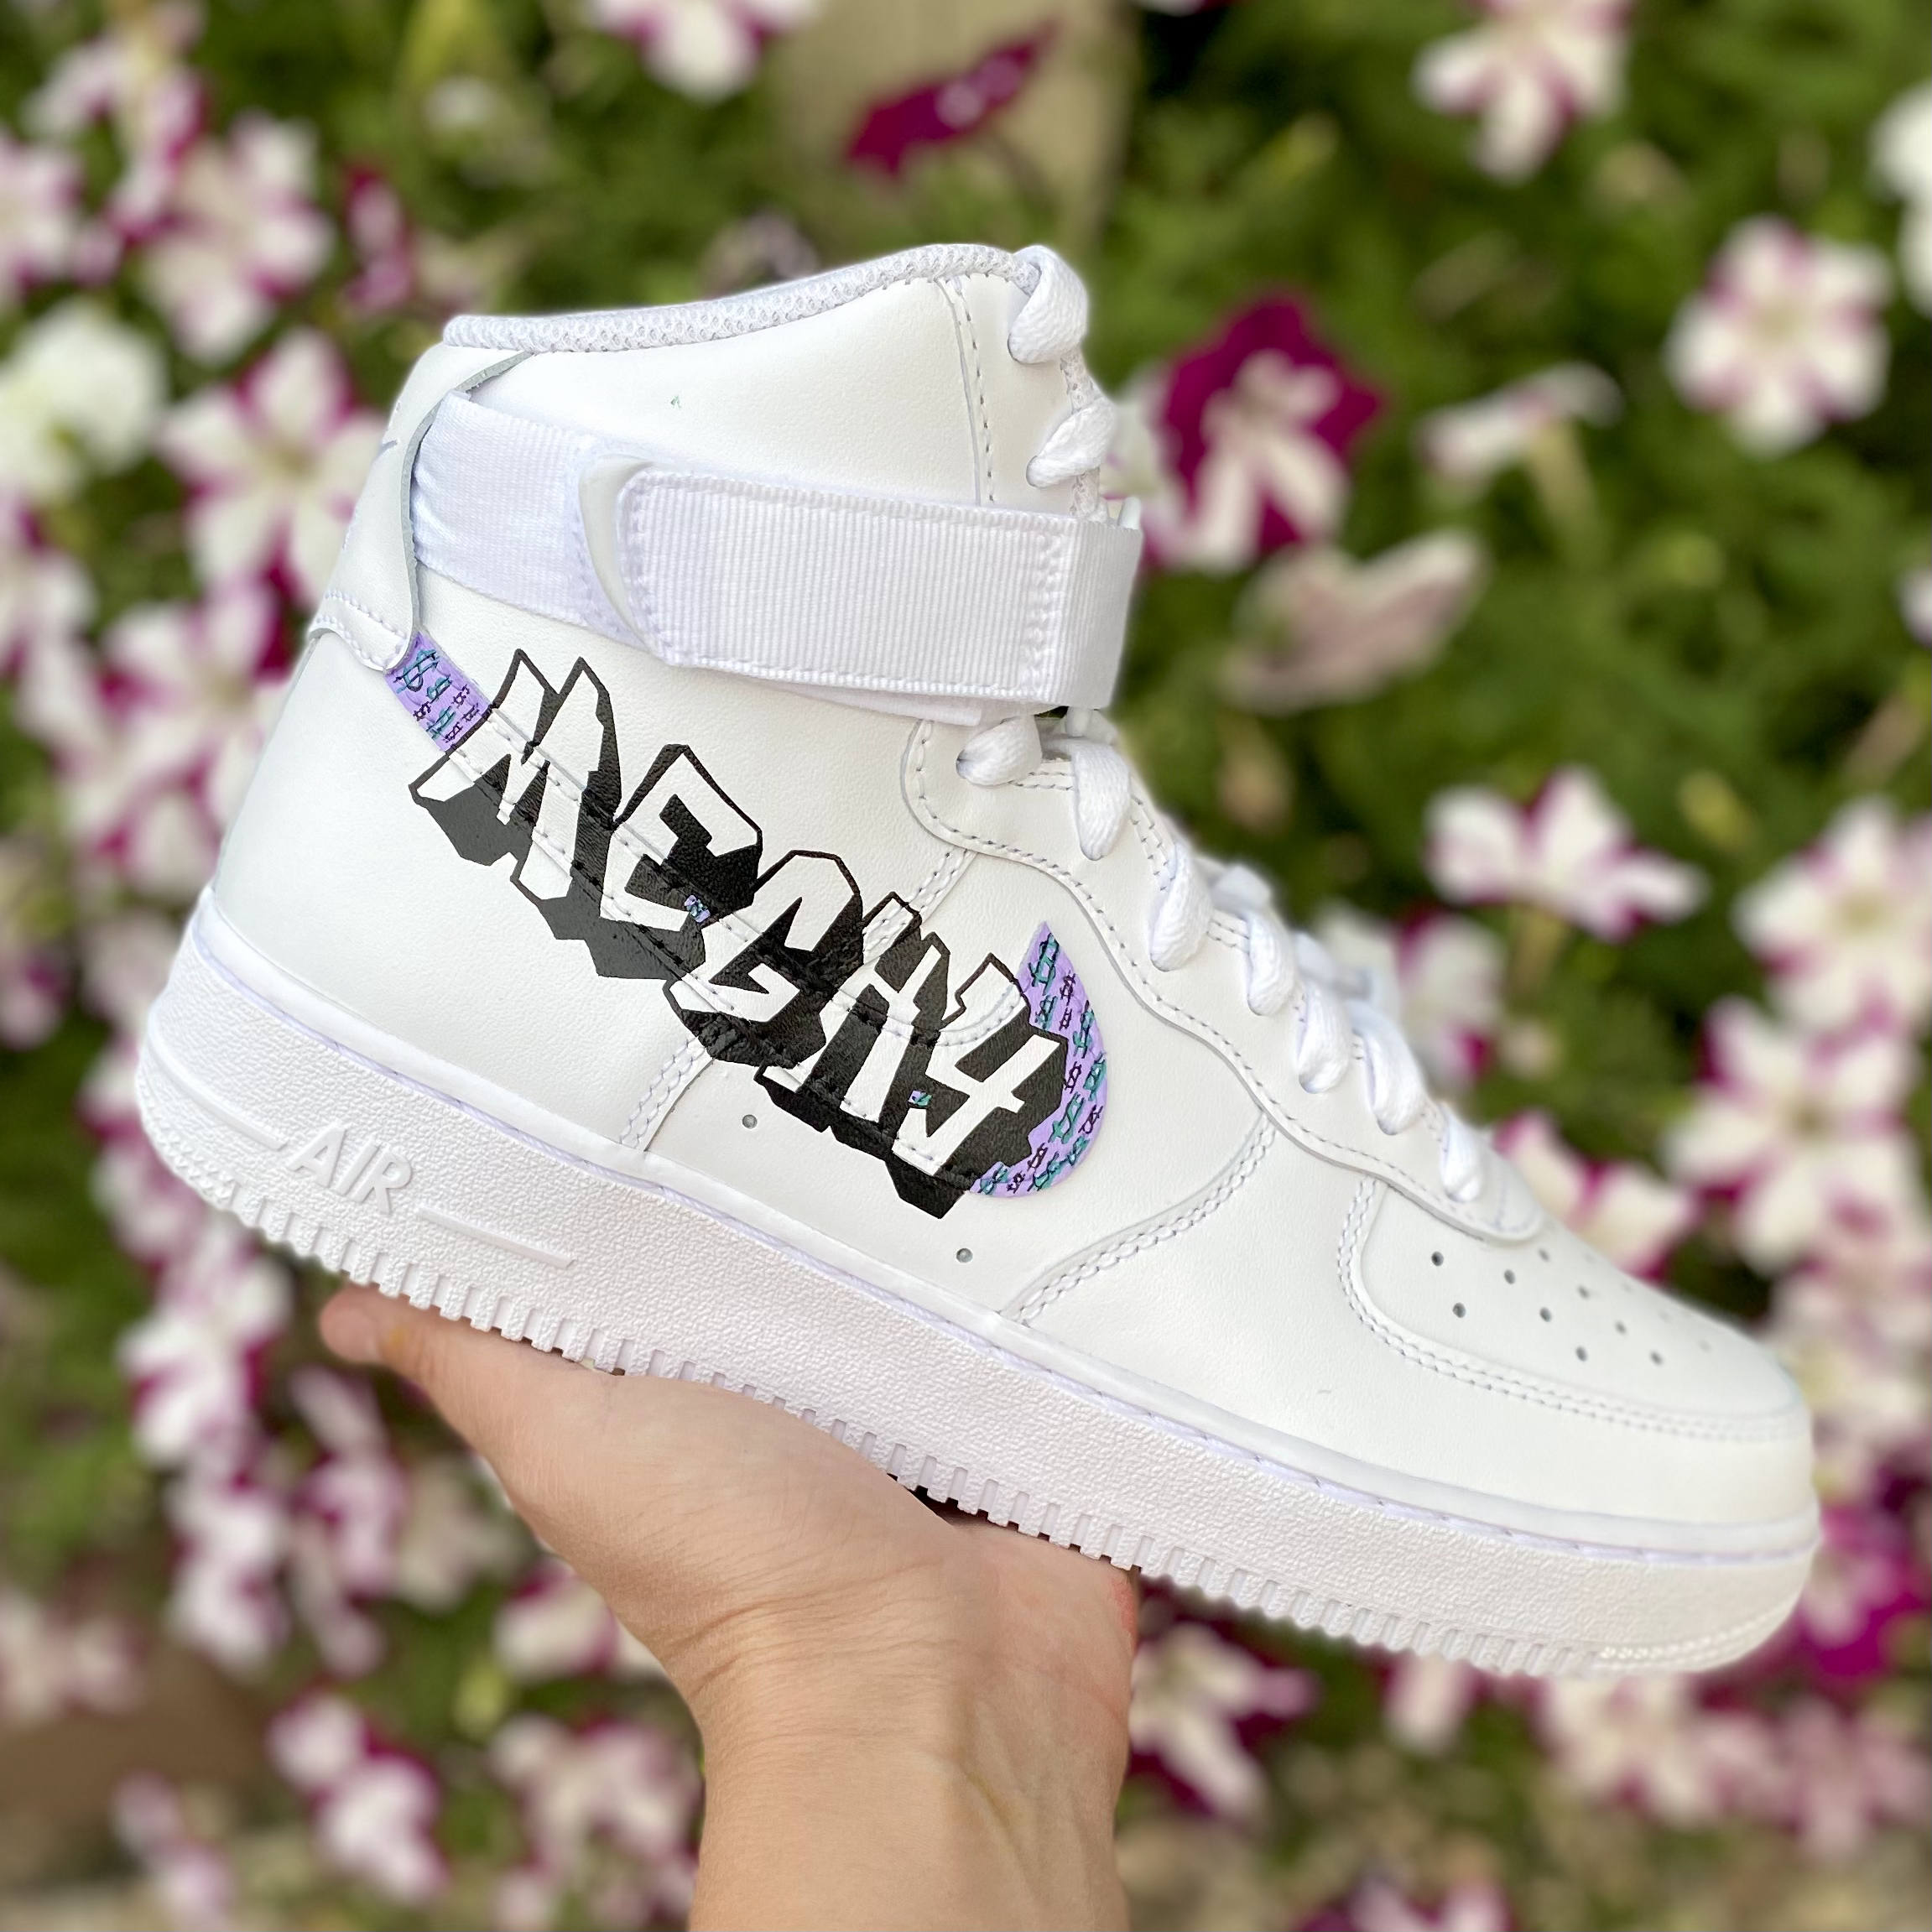 YOUR NAME - Graffiti - Custom Air Force 1 - Hand Painted AF1